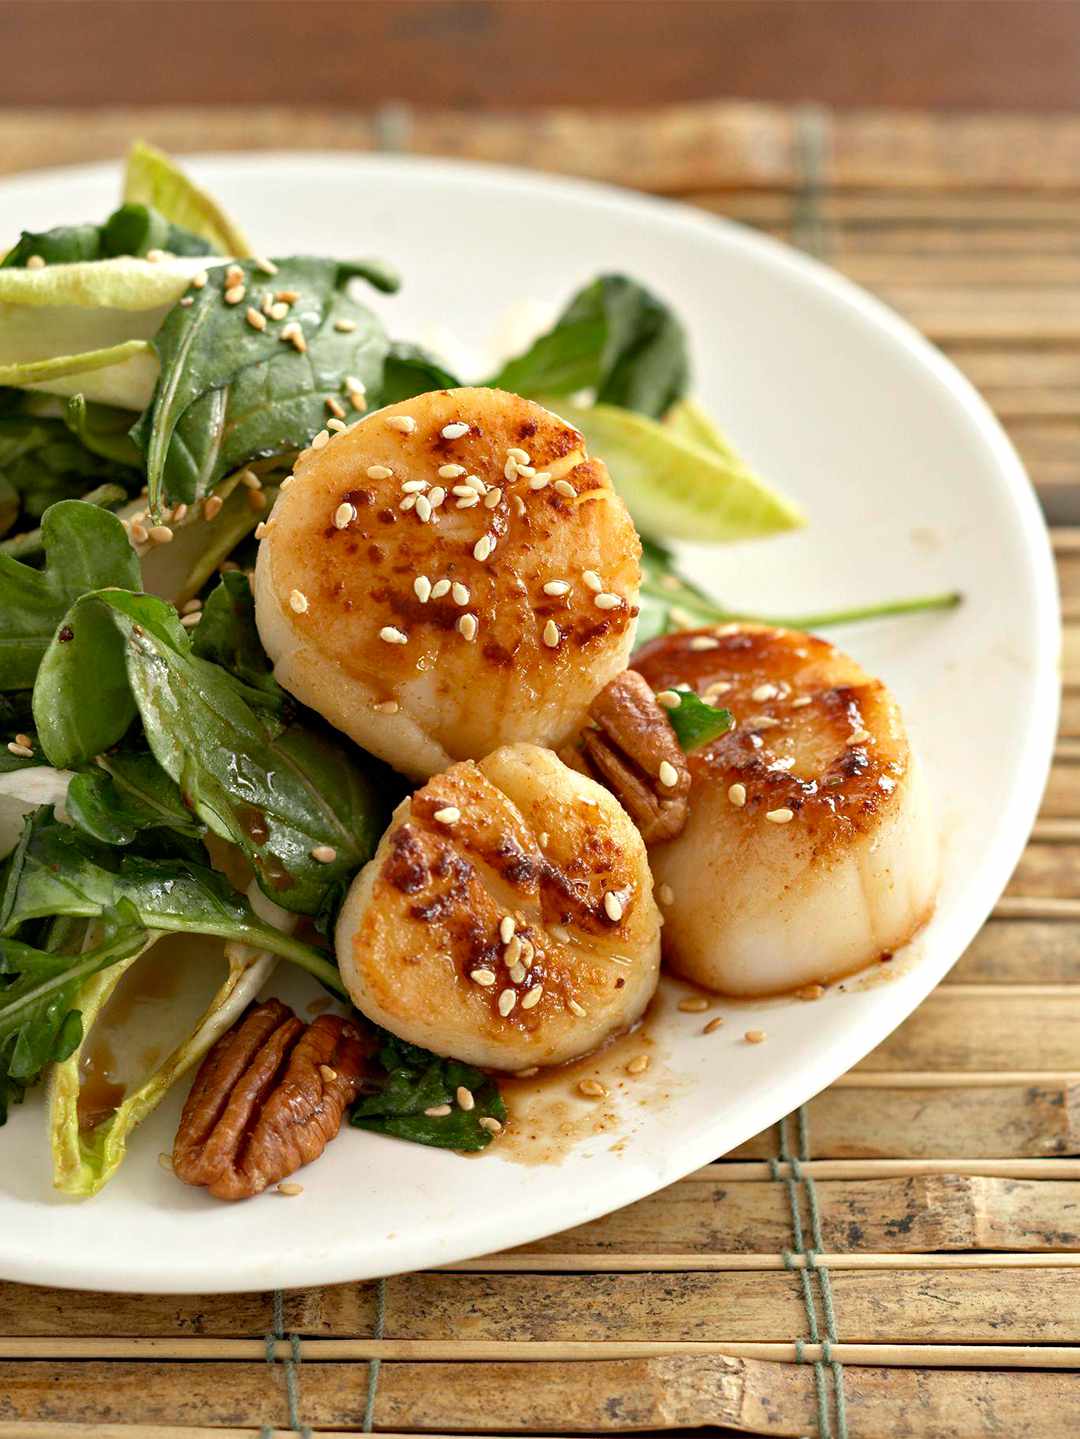 Scallops-Pecans Wilted spinach salad